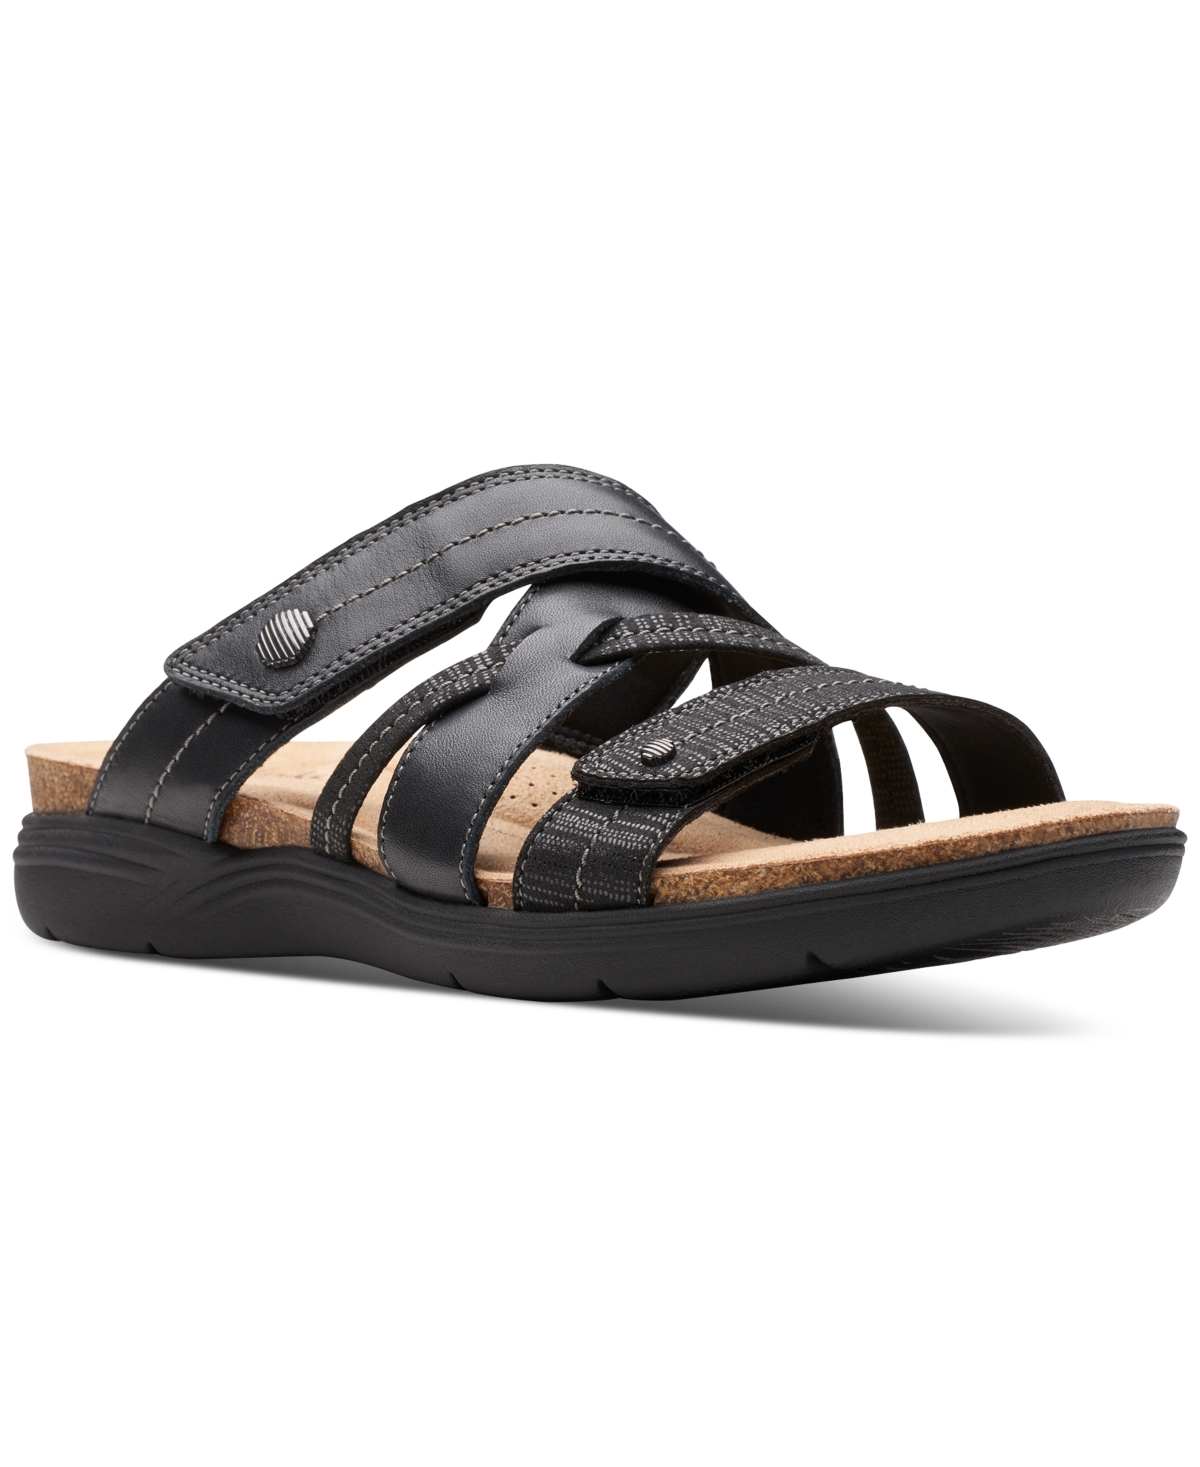 Clarks Women's April Willow Sandals In Black Leather